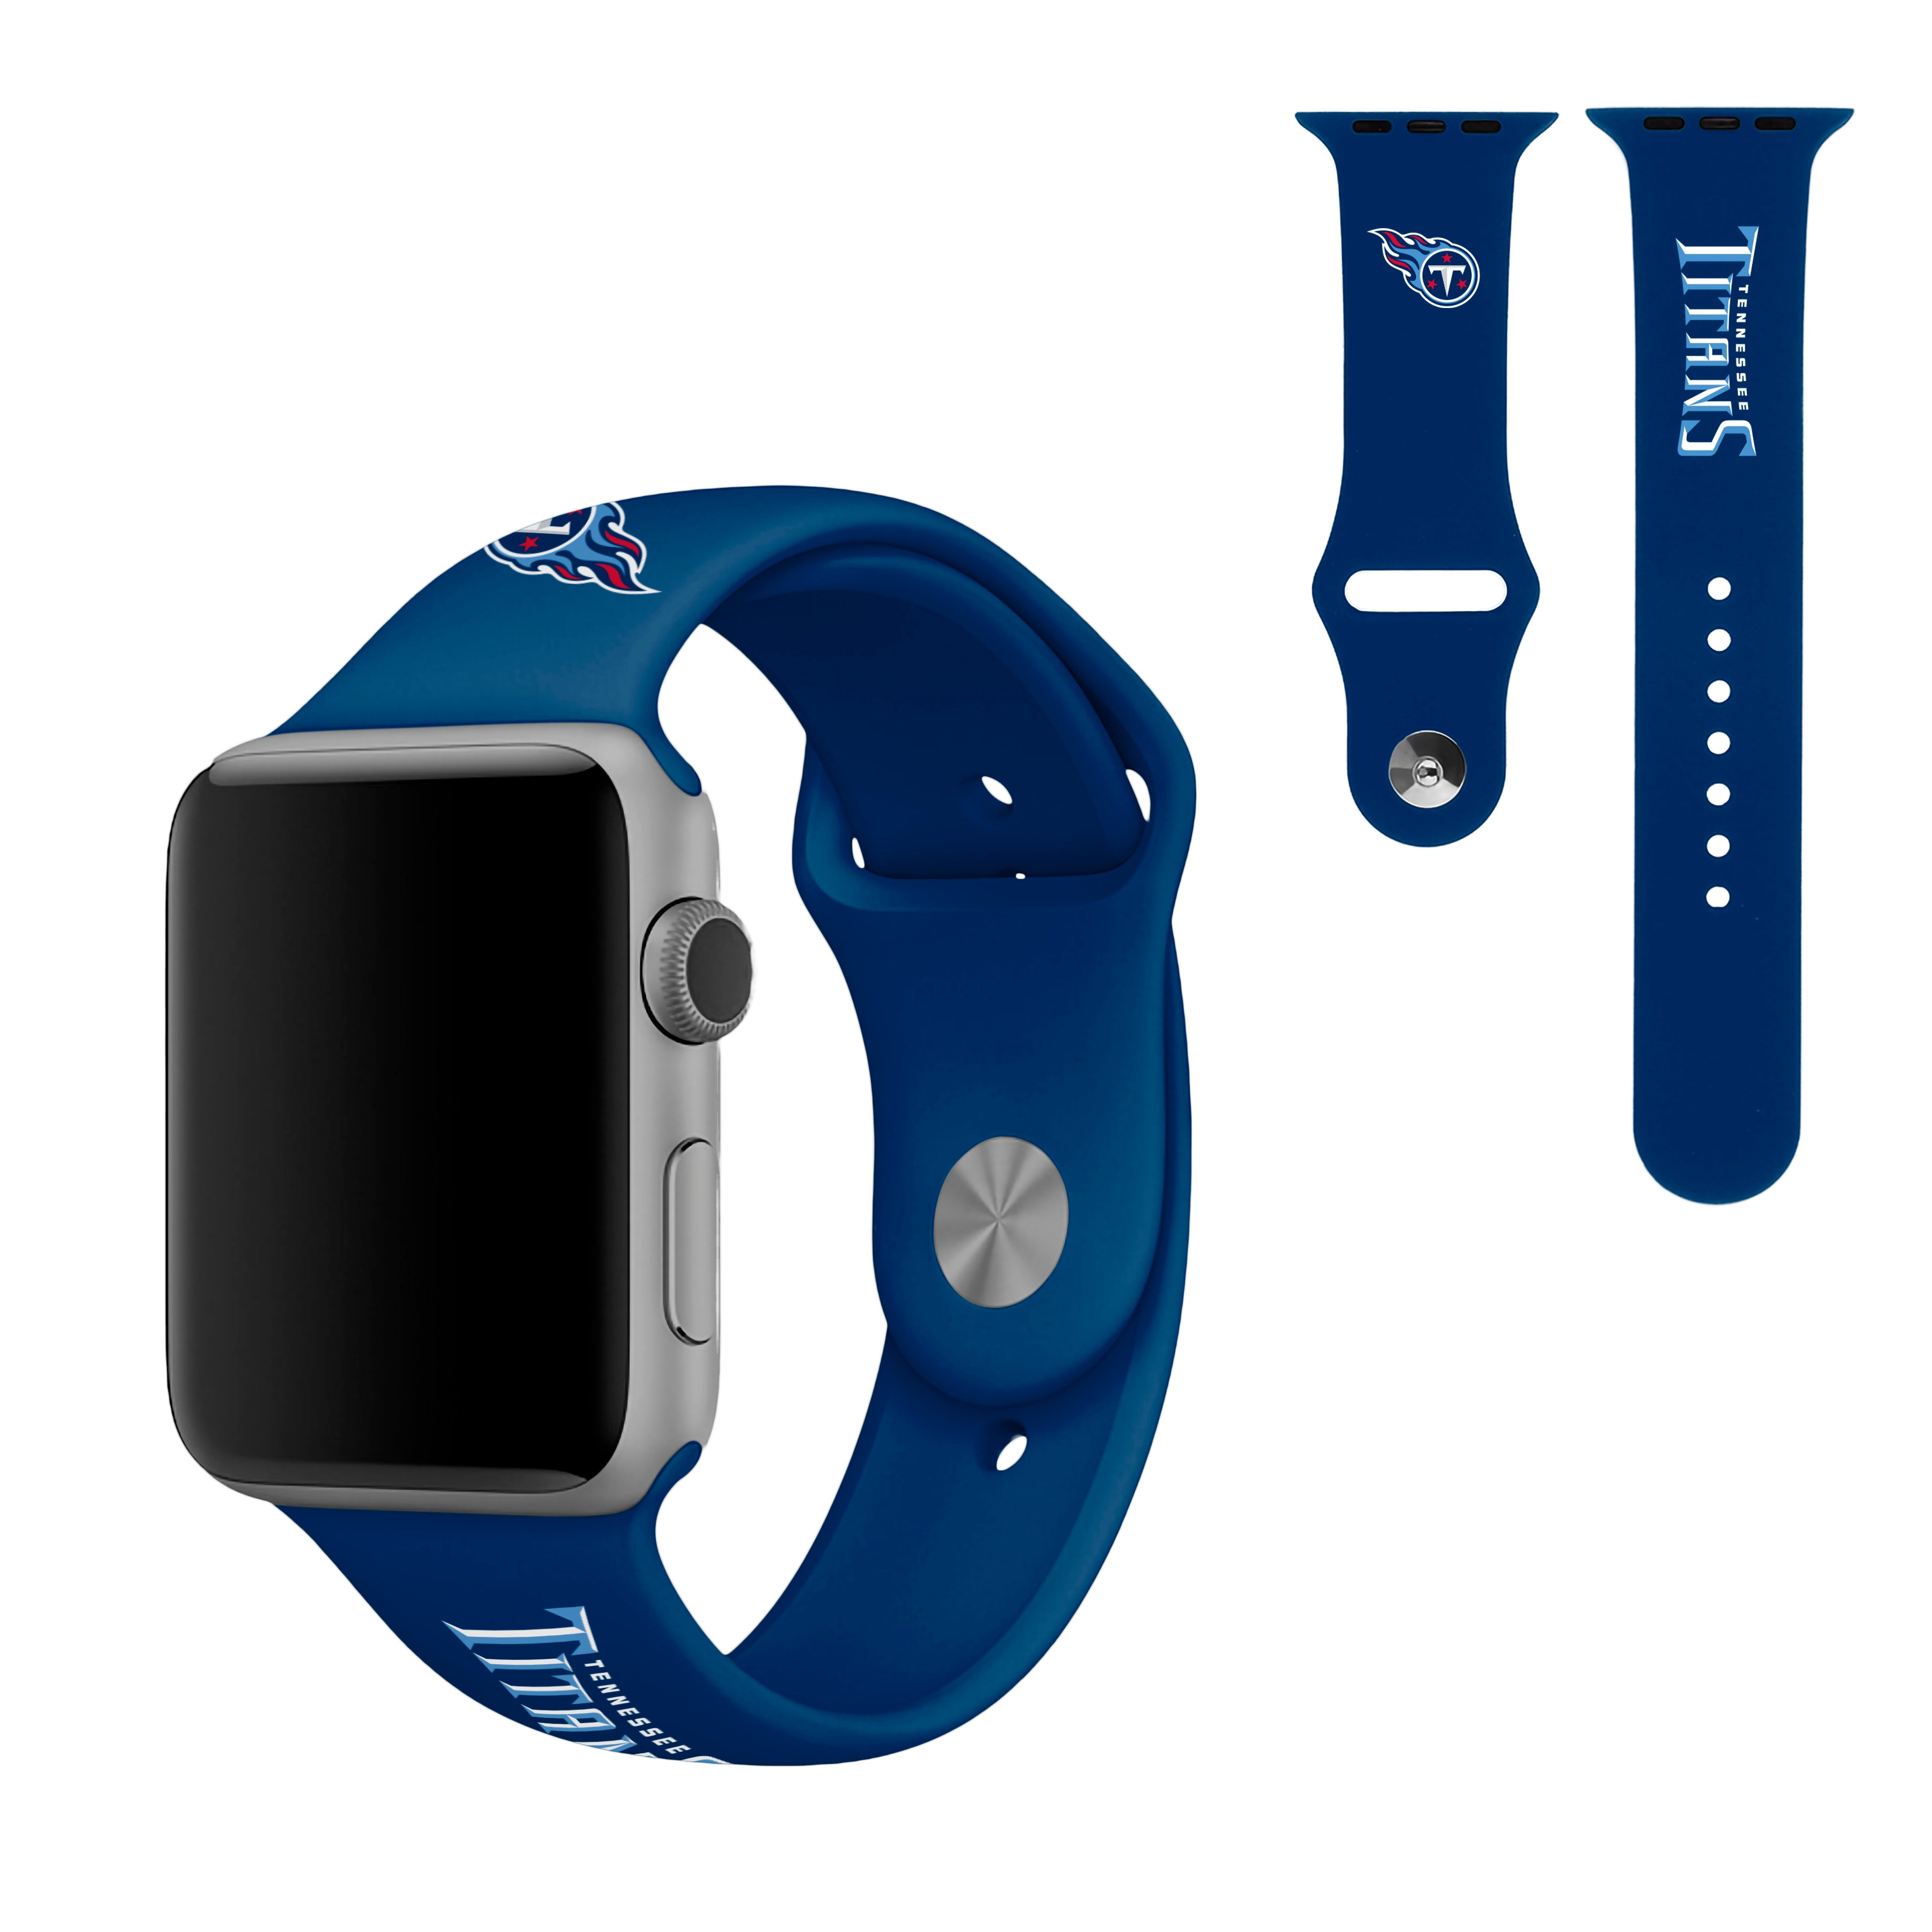 NFL Apple Watch Band - 42mm